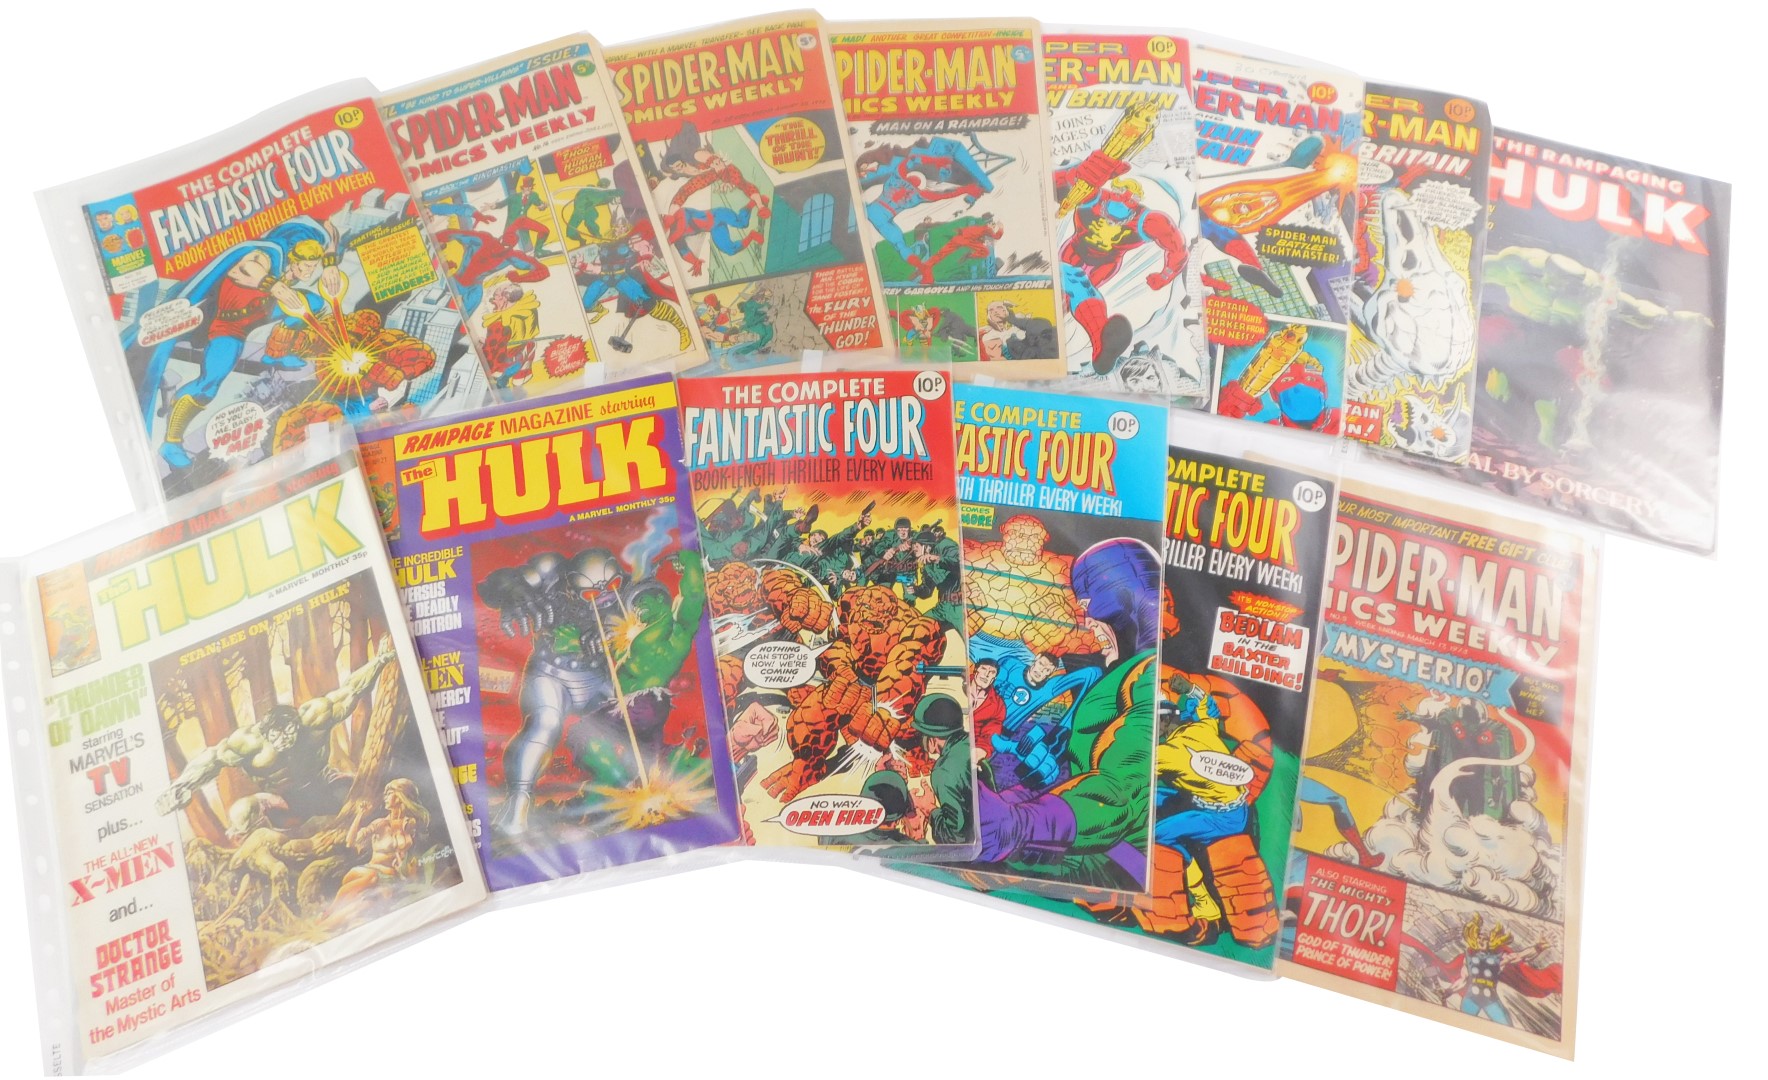 Marvel Comics, to include The Rampaging Hulk 1977-1980., The Fantastic Four 1978., Spiderman Weekly